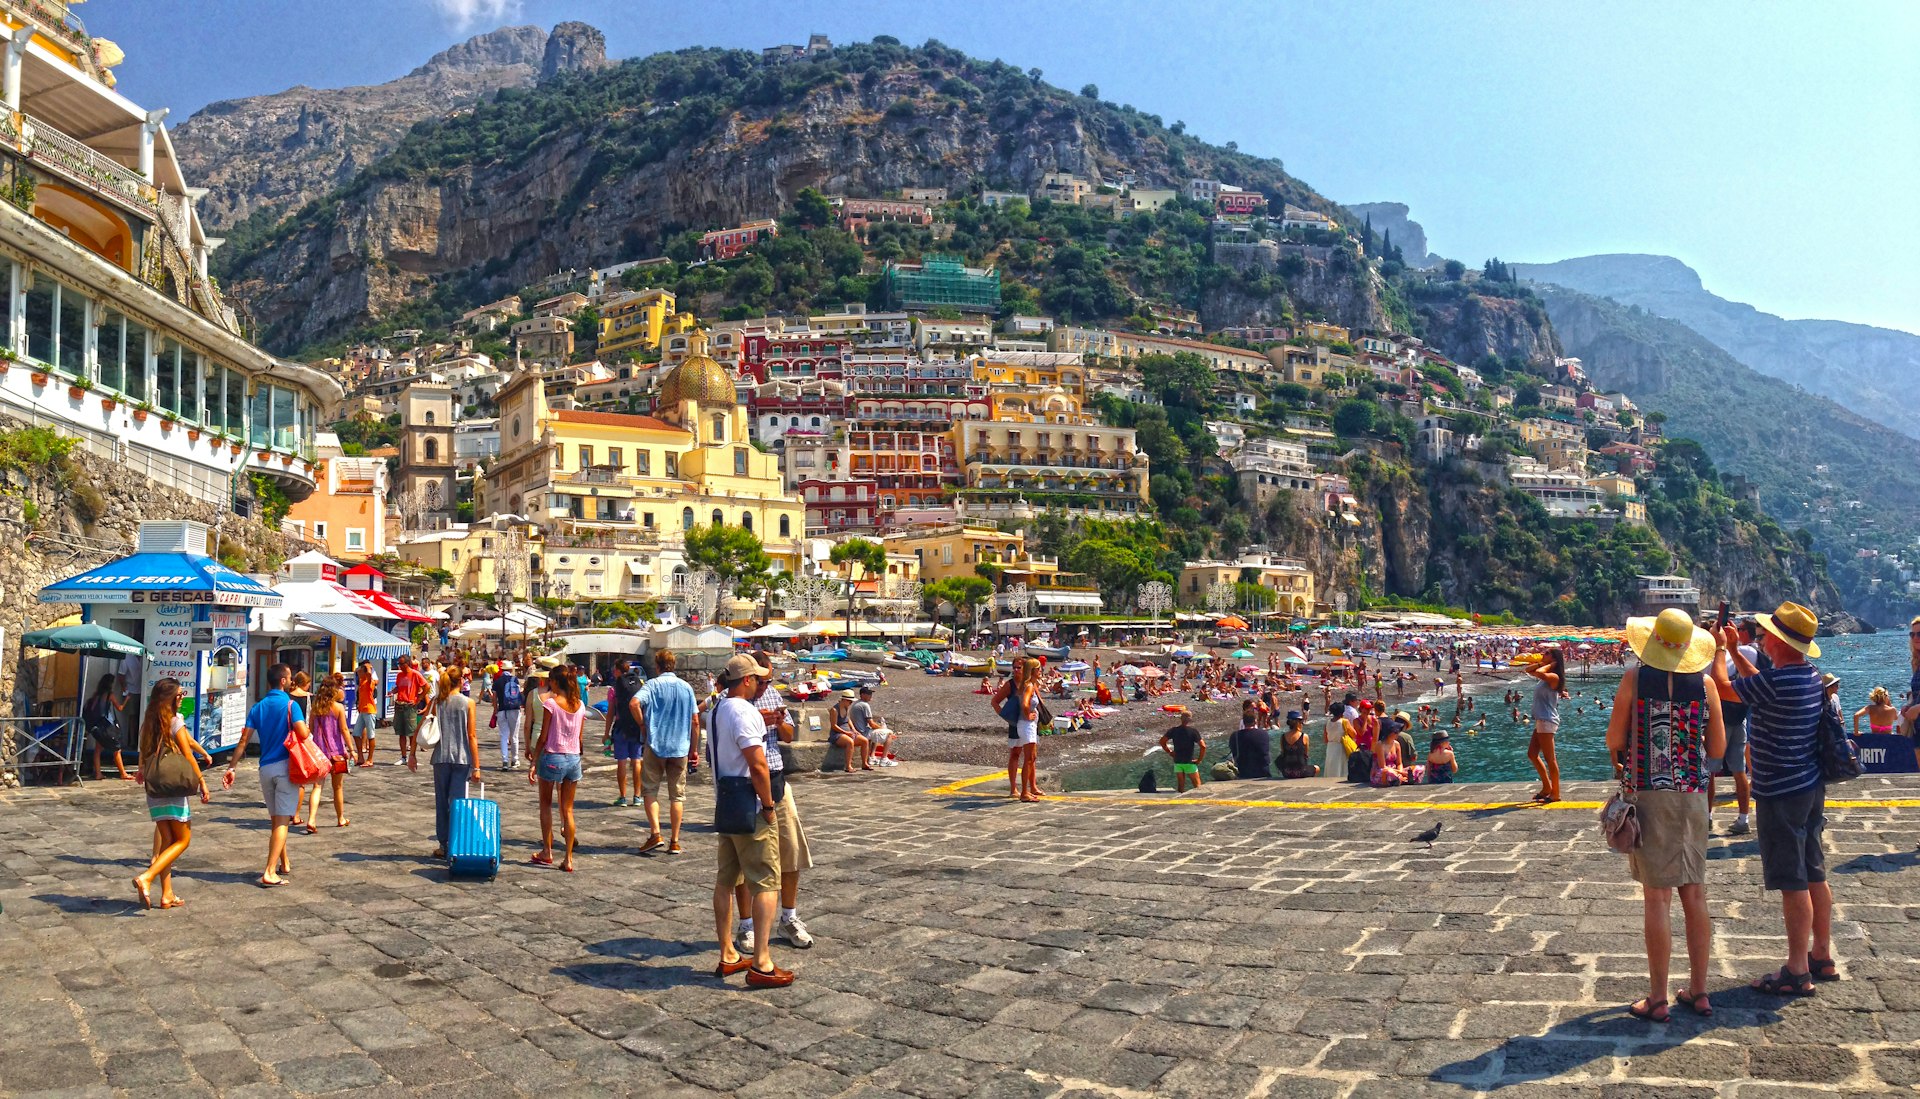 Positano is a cliffside village on southern Italy's Amalfi Coast. It's a well-known holiday destination with a pebble beachfront and steep, narrow streets lined with boutiques and cafes.